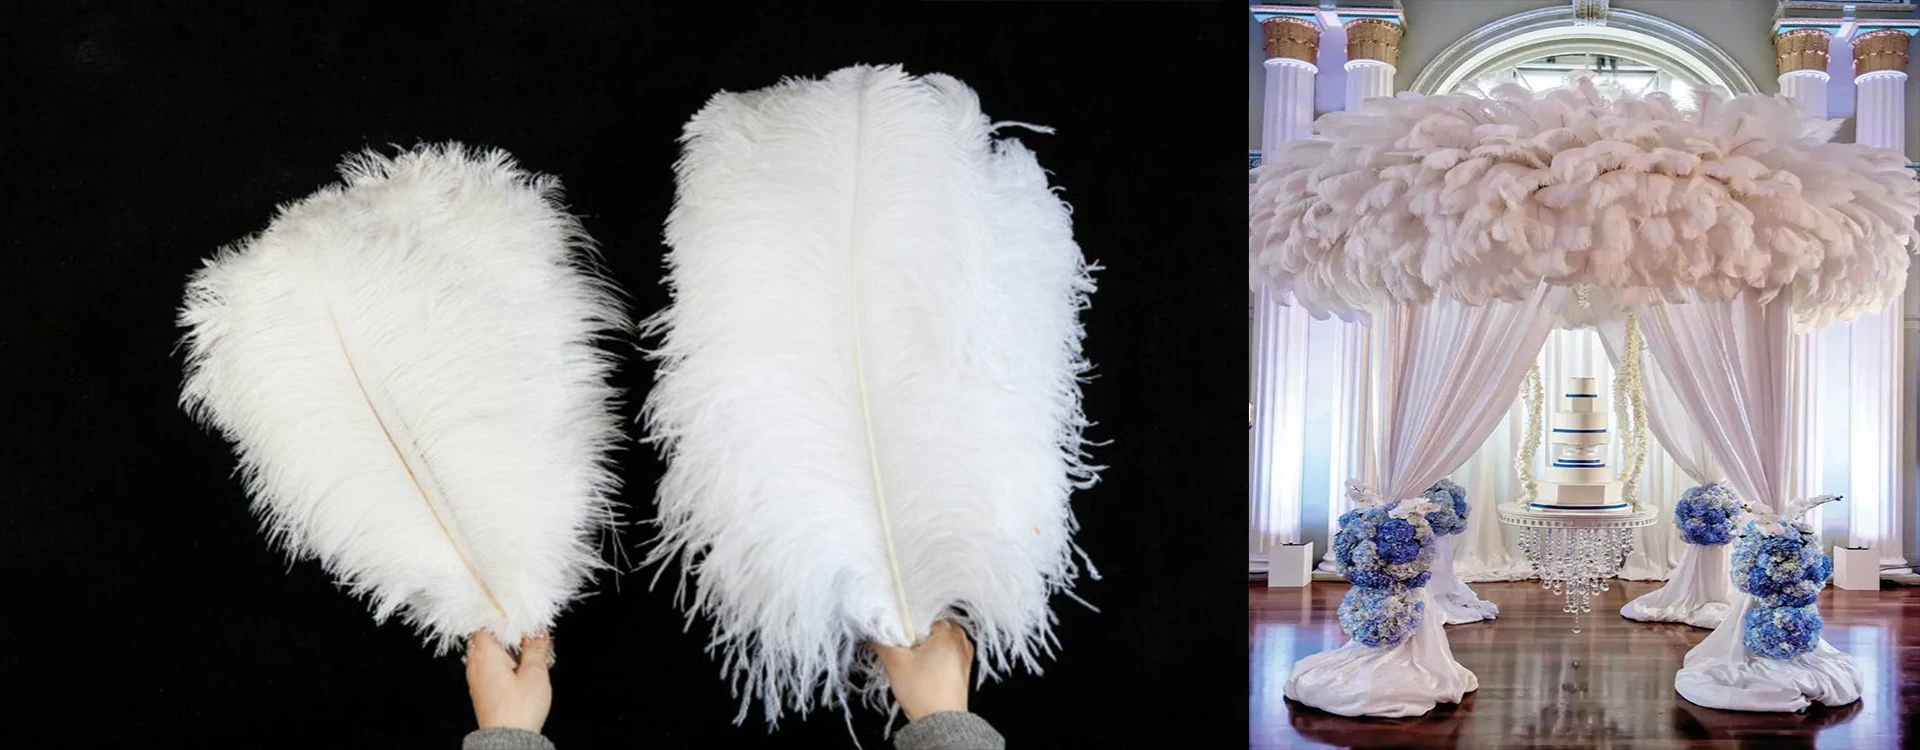 5-100pcs high quality beautiful white ostrich feathers 6-24 inches / 15-60  cm